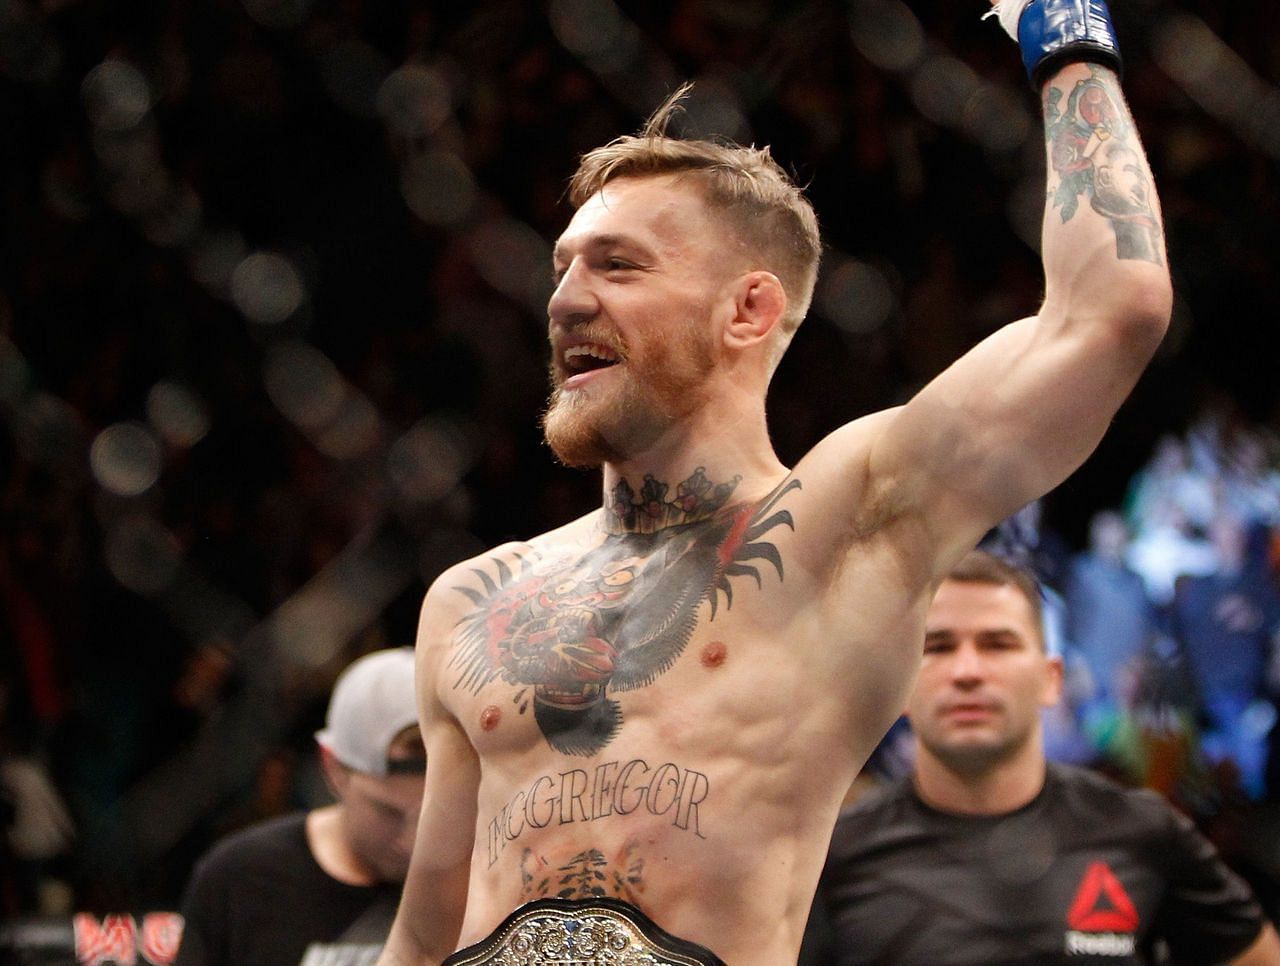 Conor McGregor took the featherweight title from Jose Aldo, but never defended it